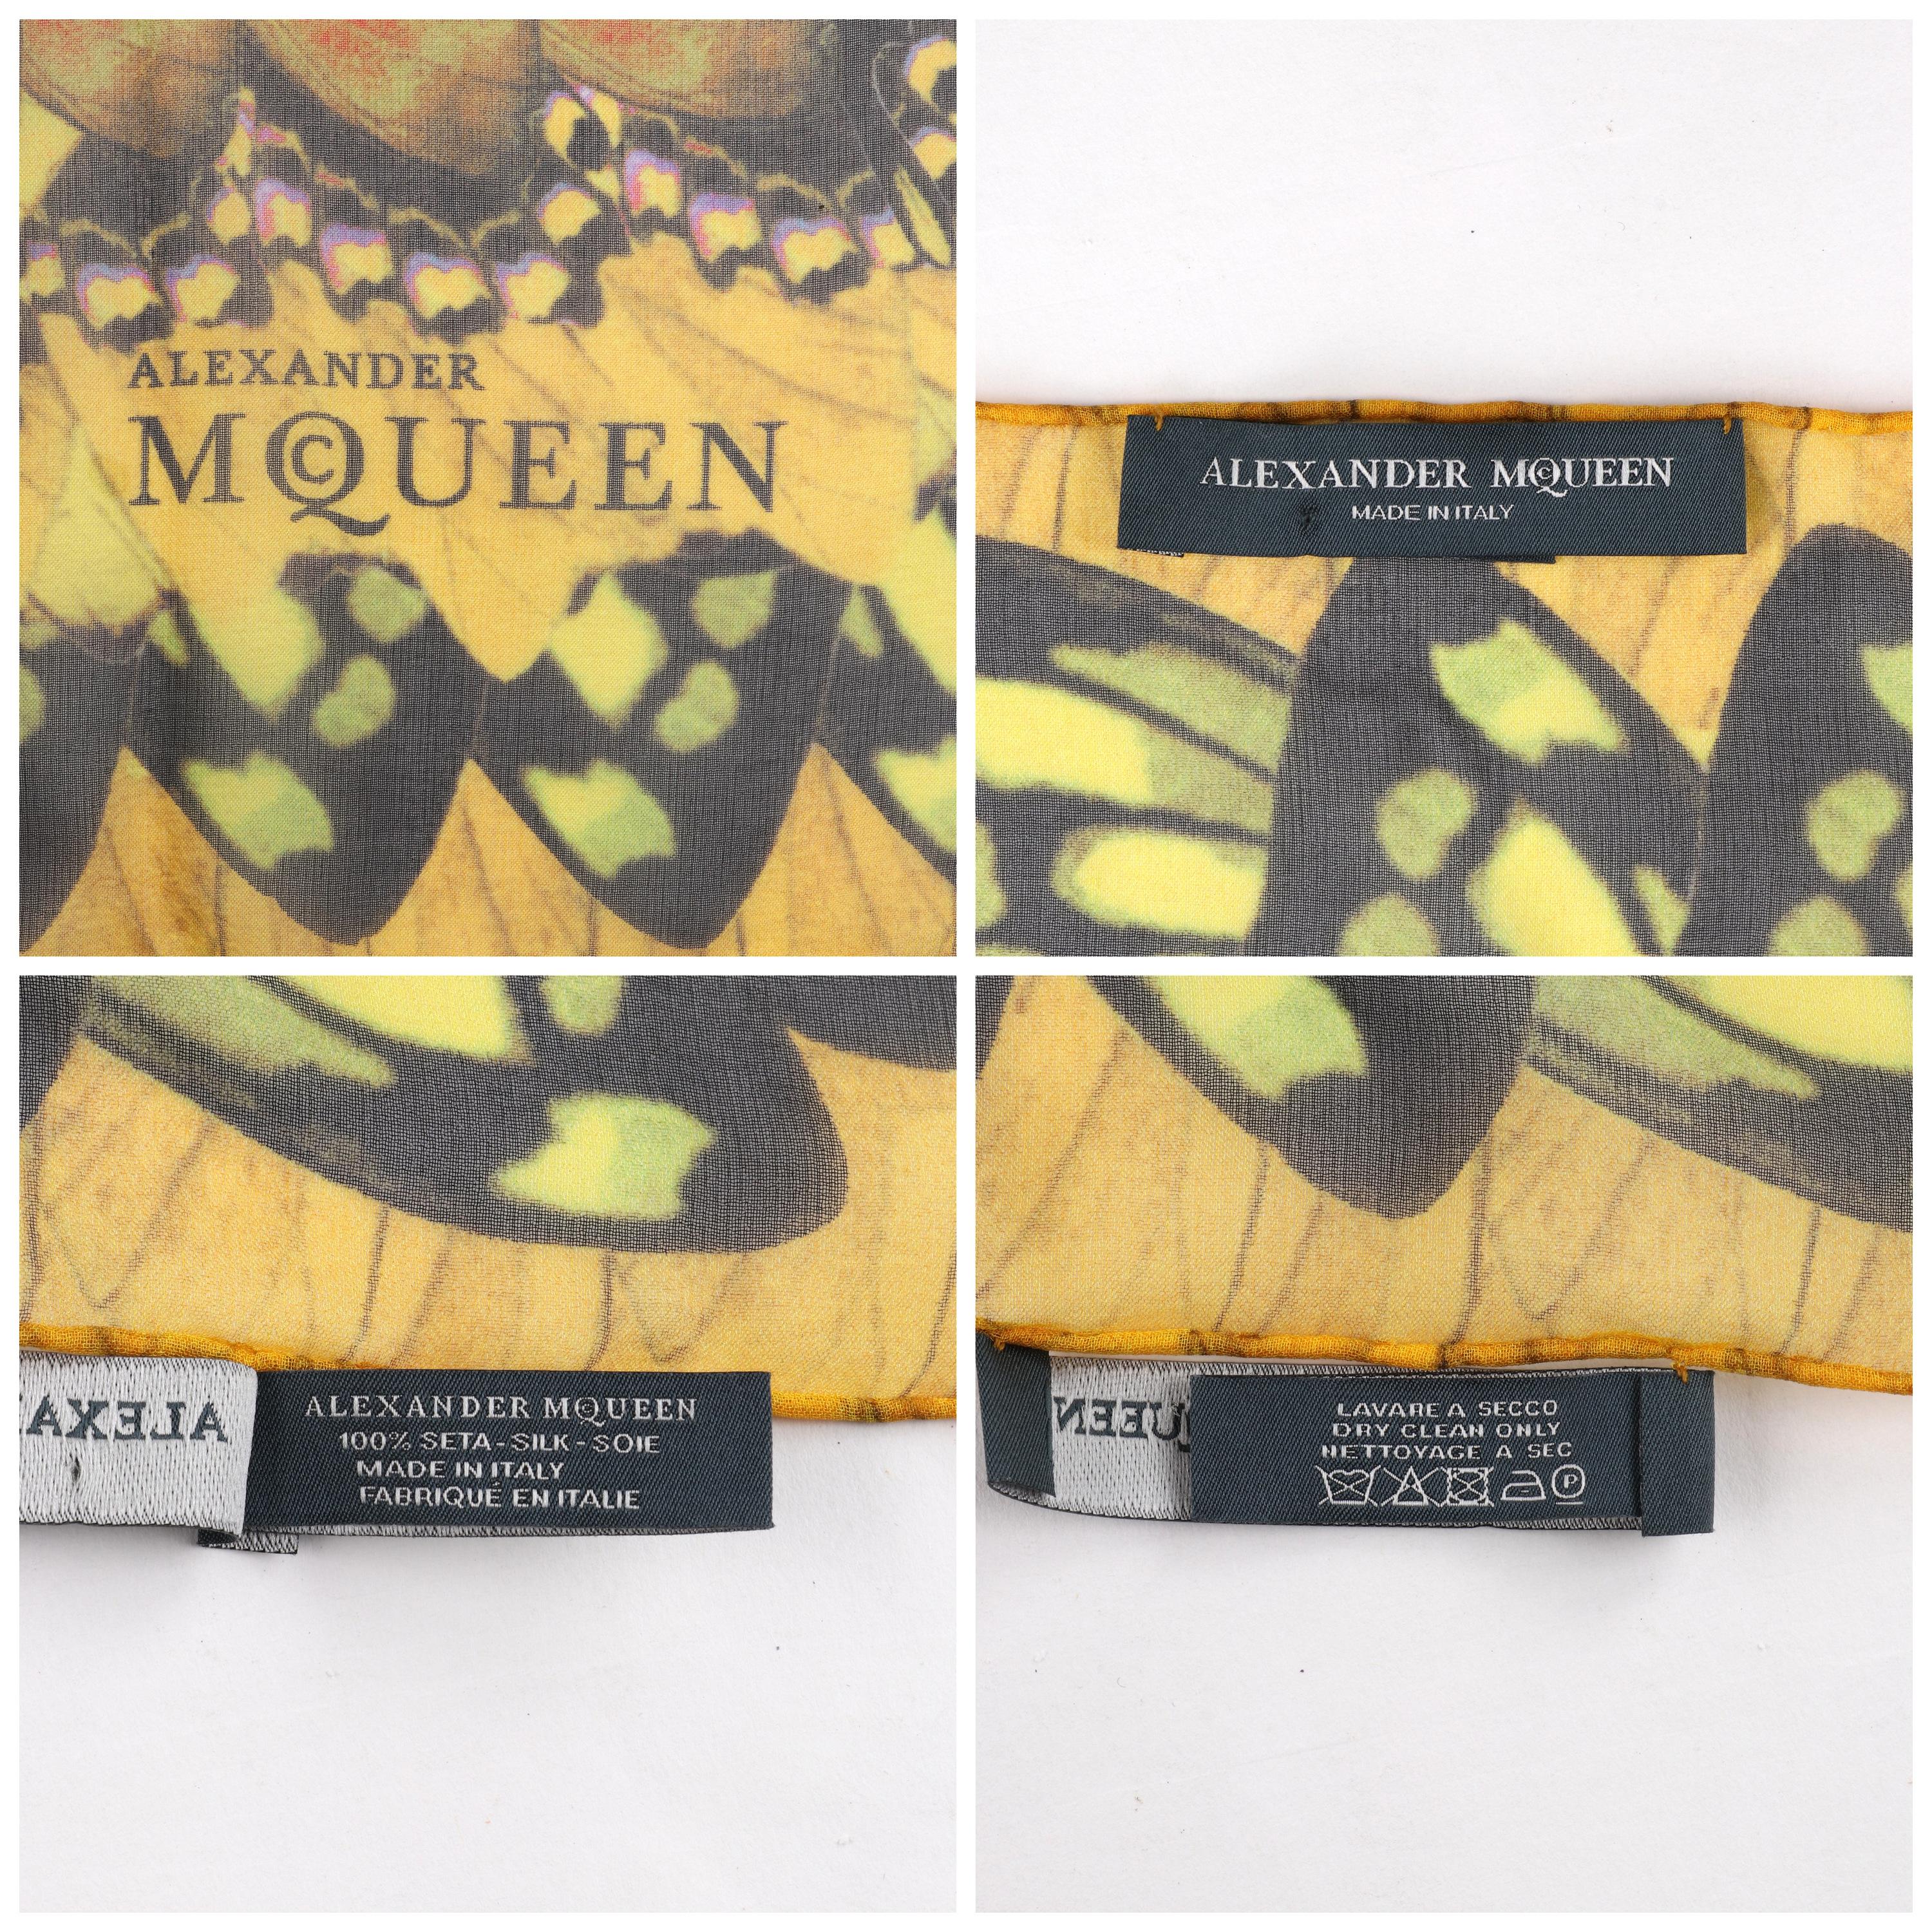 ALEXANDER McQUEEN S/S 2008 Rainbow Wings Kaleidoscope Blue Yellow Square Scarf In Good Condition For Sale In Thiensville, WI